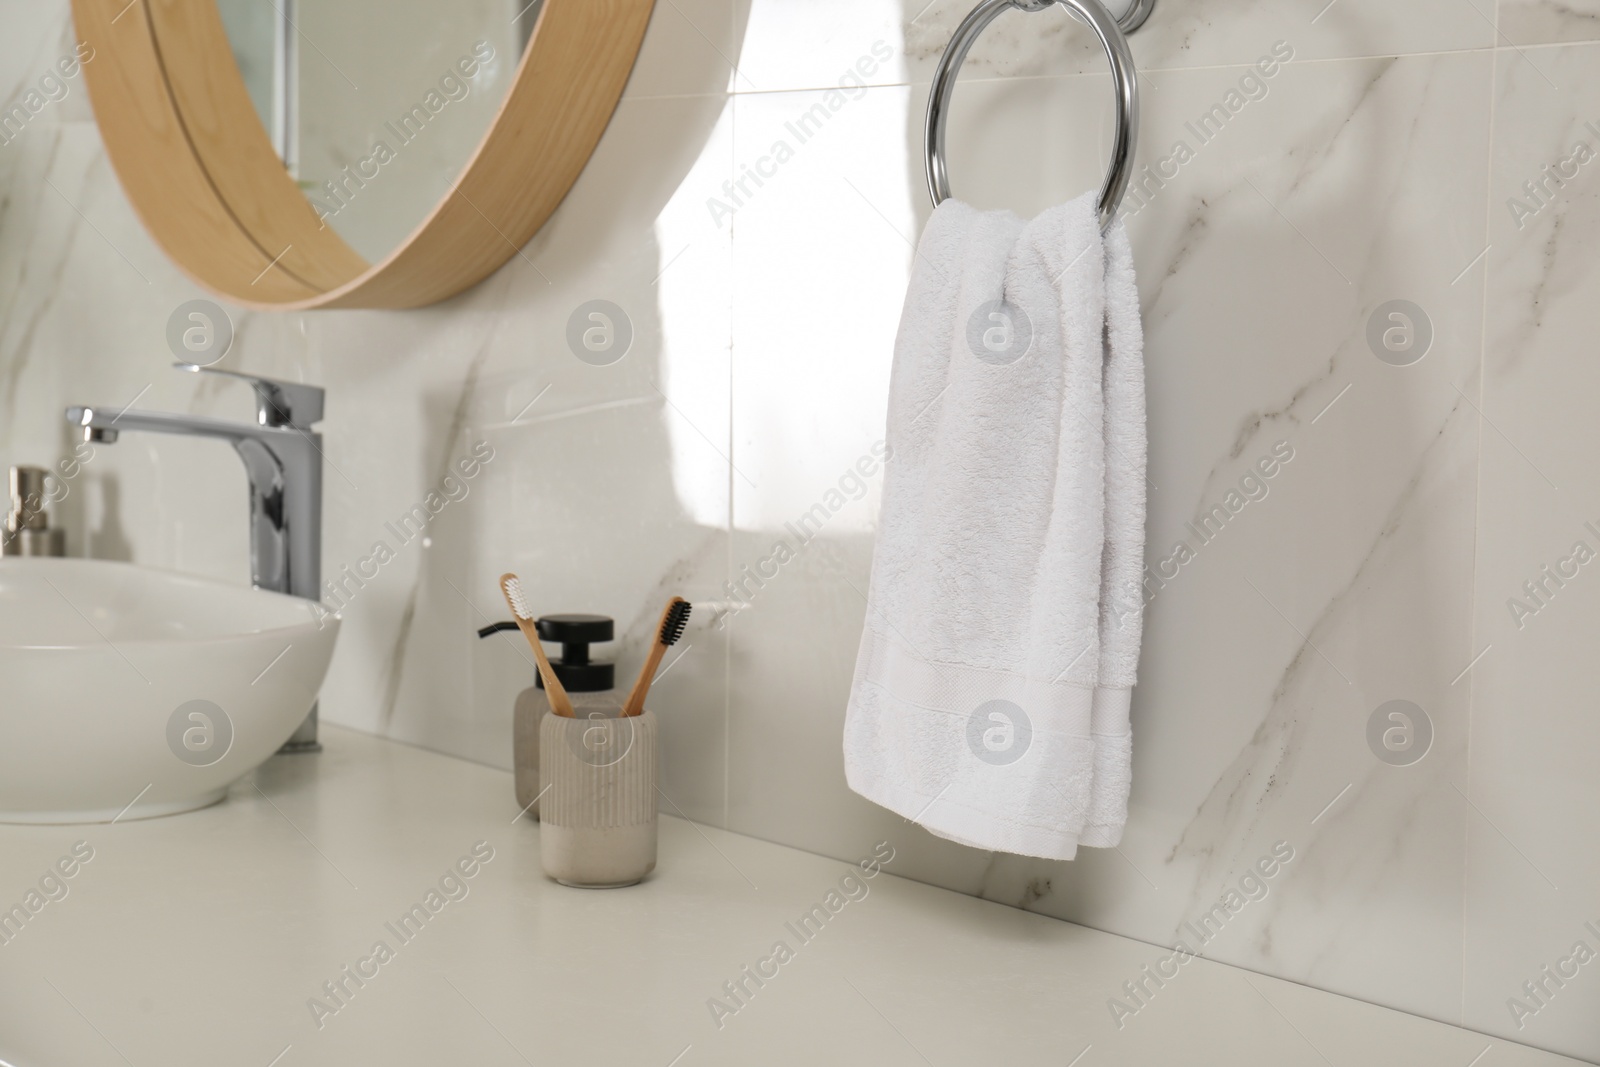 Photo of Soft towel on wall above bathroom countertop with toiletries